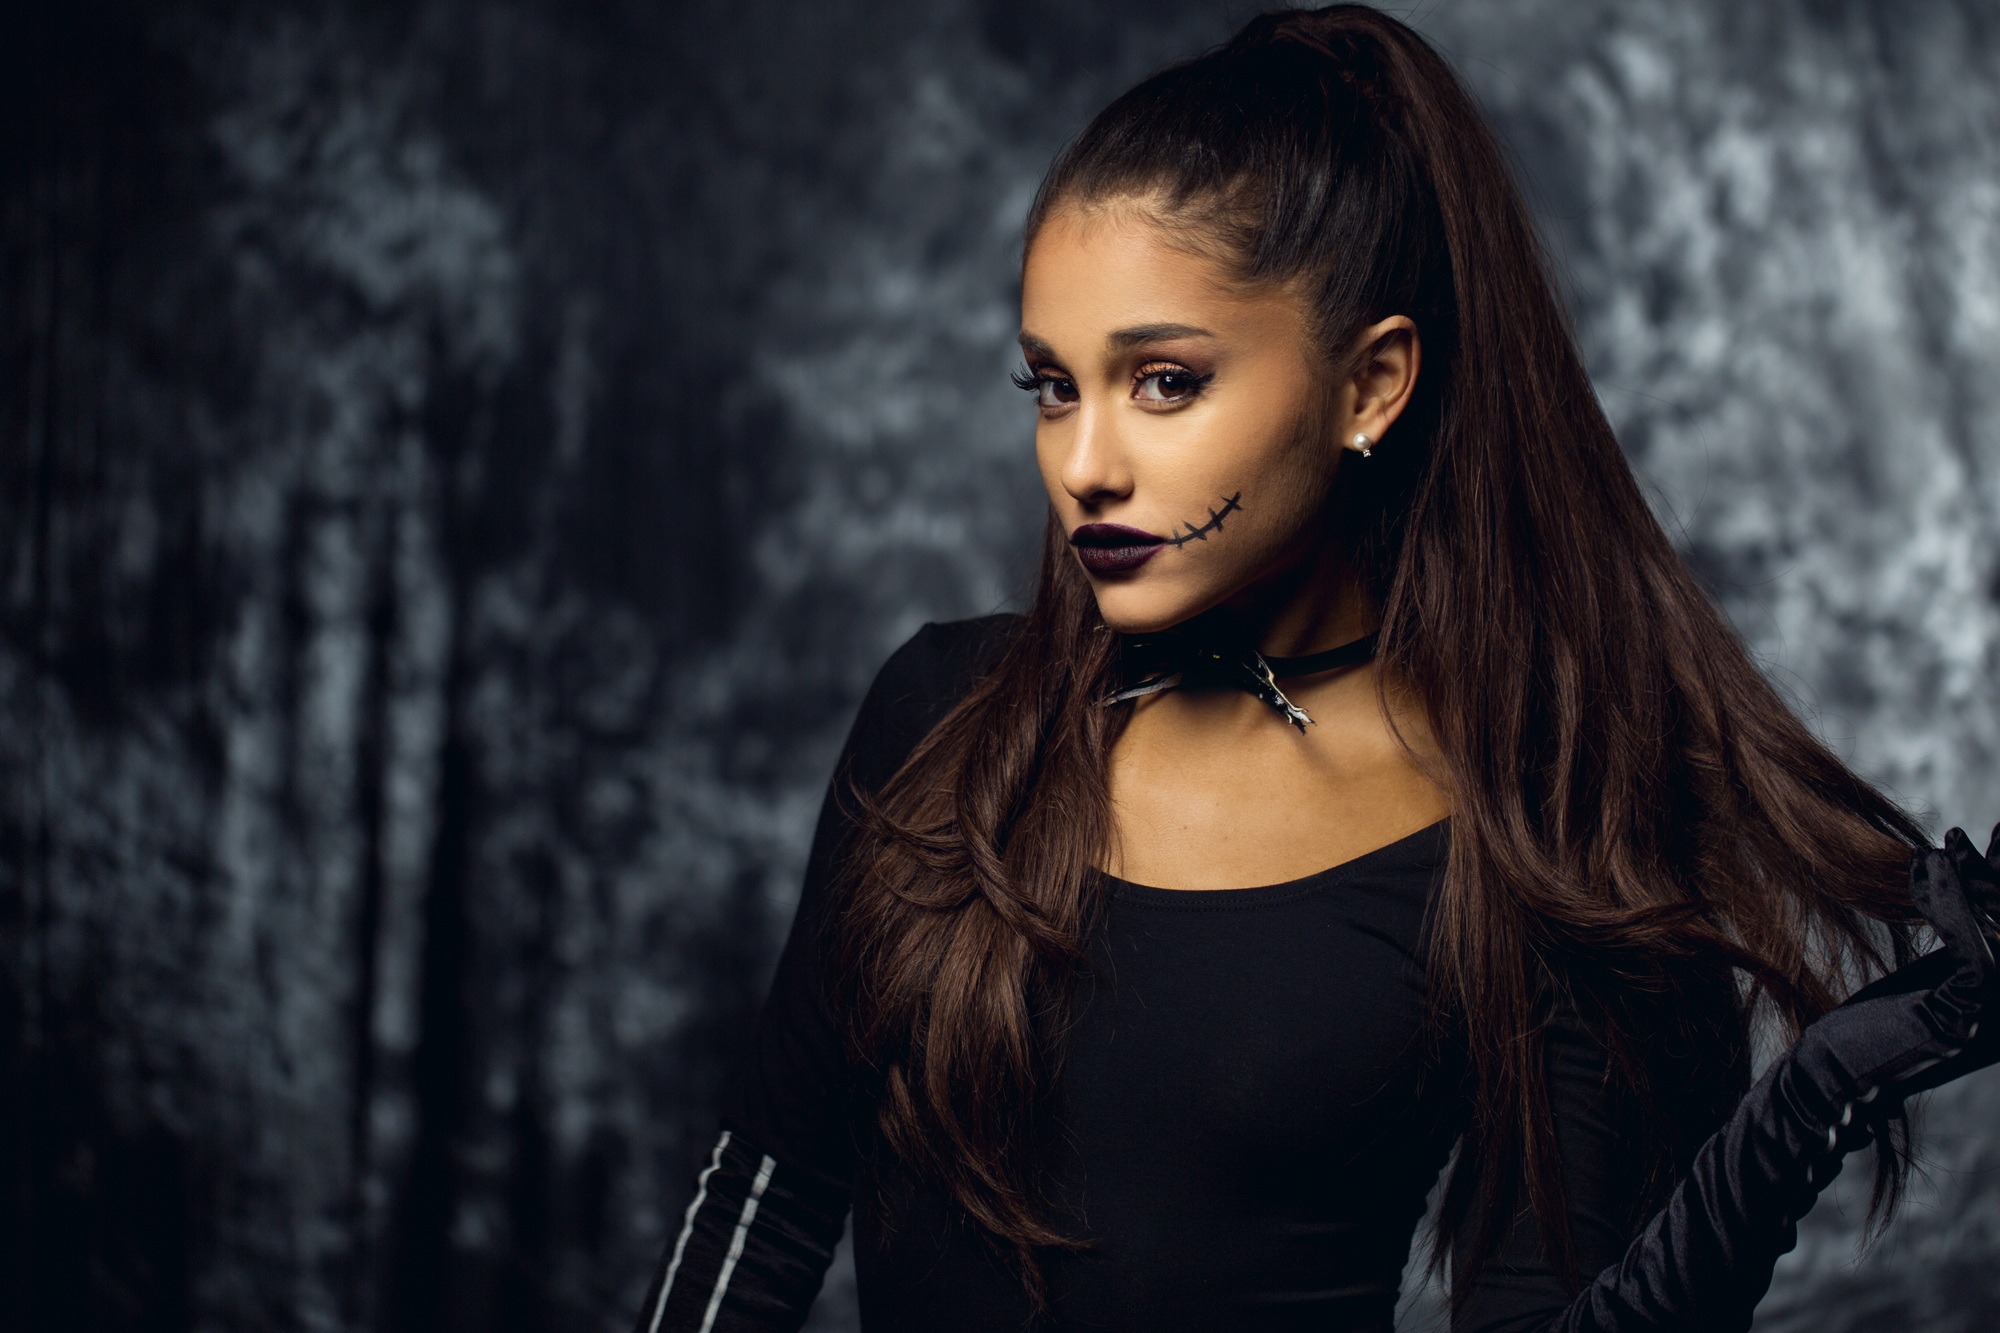 Ariana grande woman images